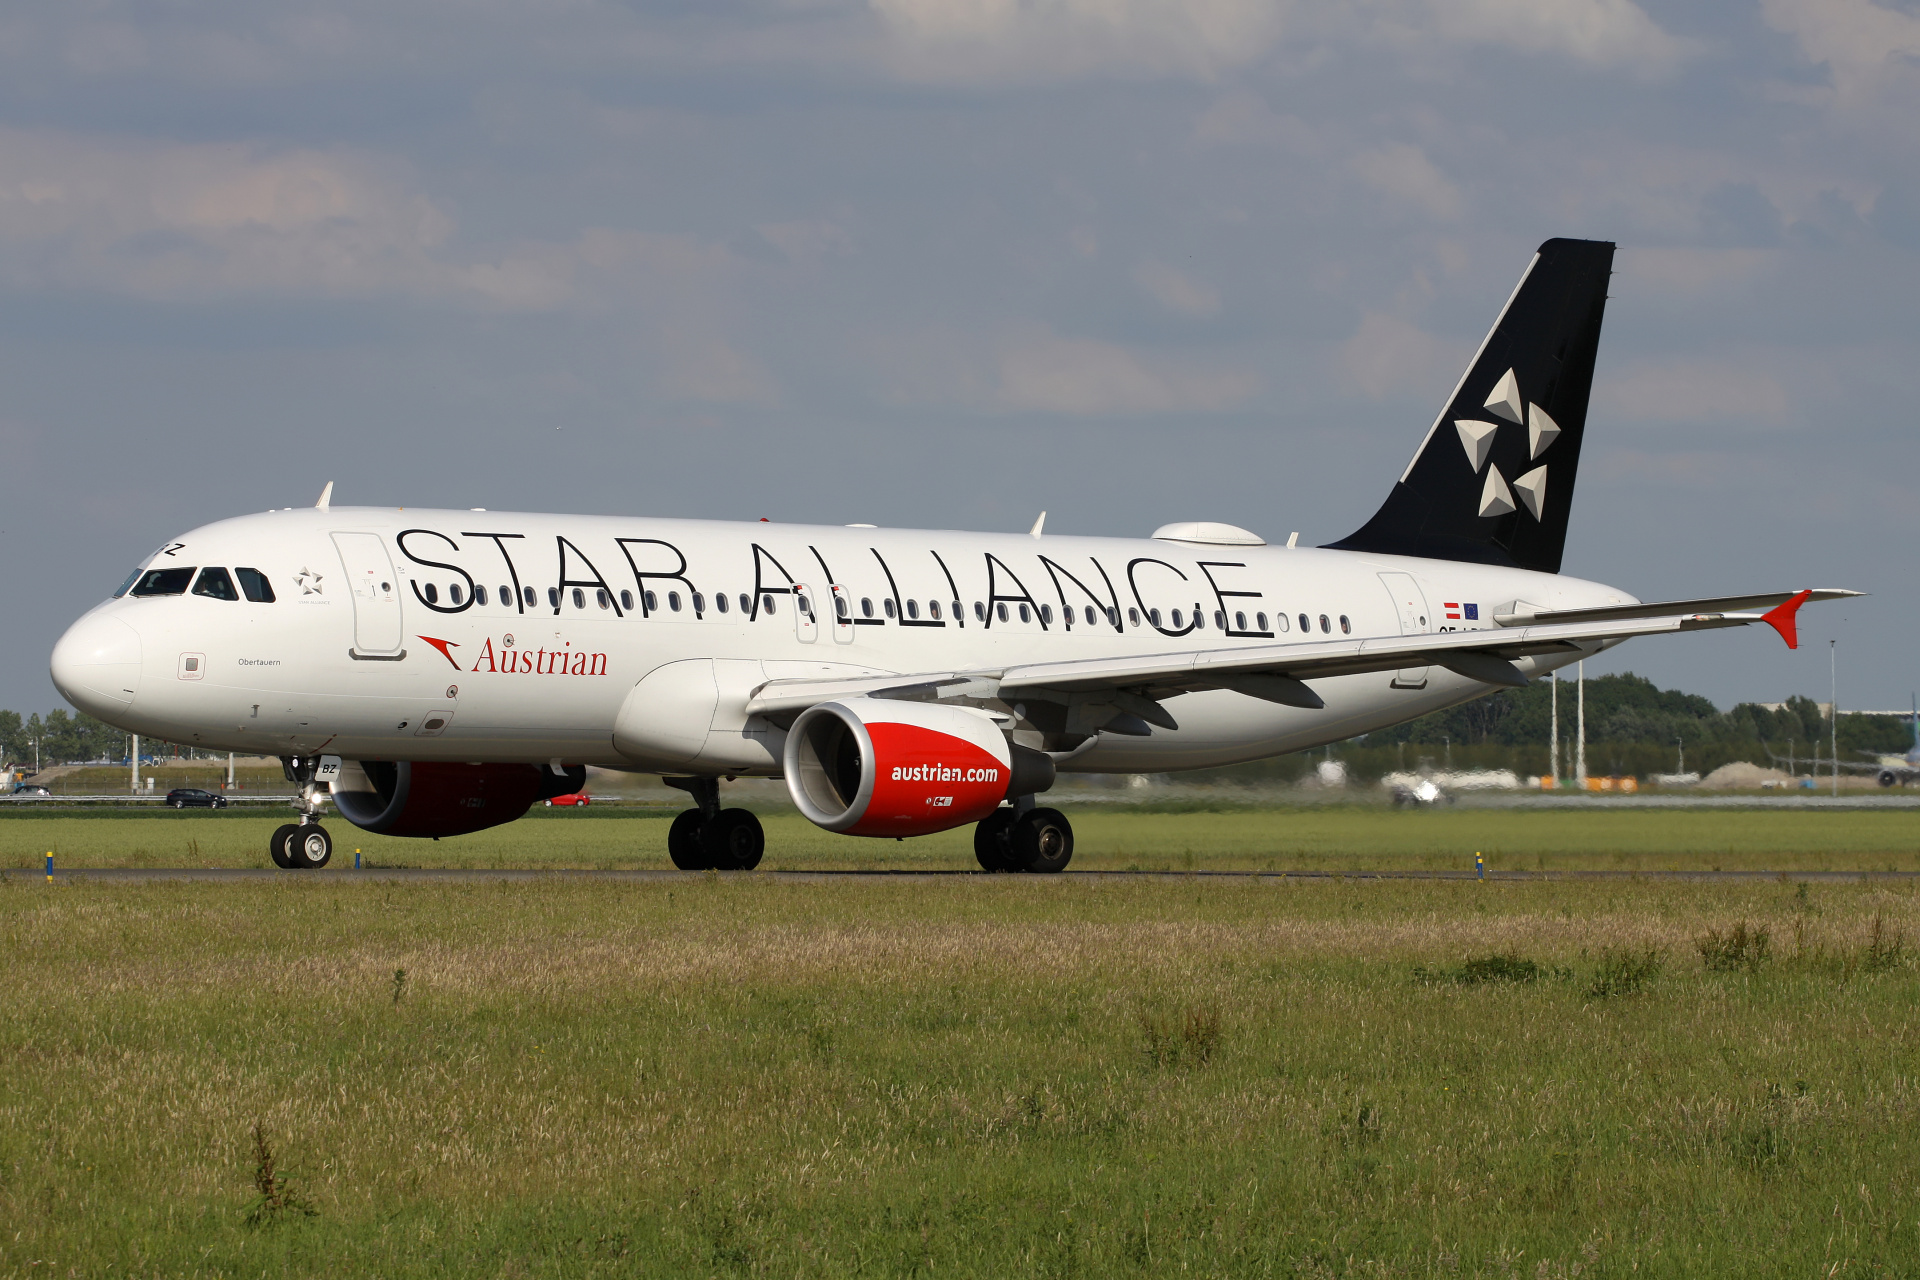 OE-LBZ, Austrian Airlines (Star Alliance livery) (Aircraft » Schiphol Spotting » Airbus A320-200)